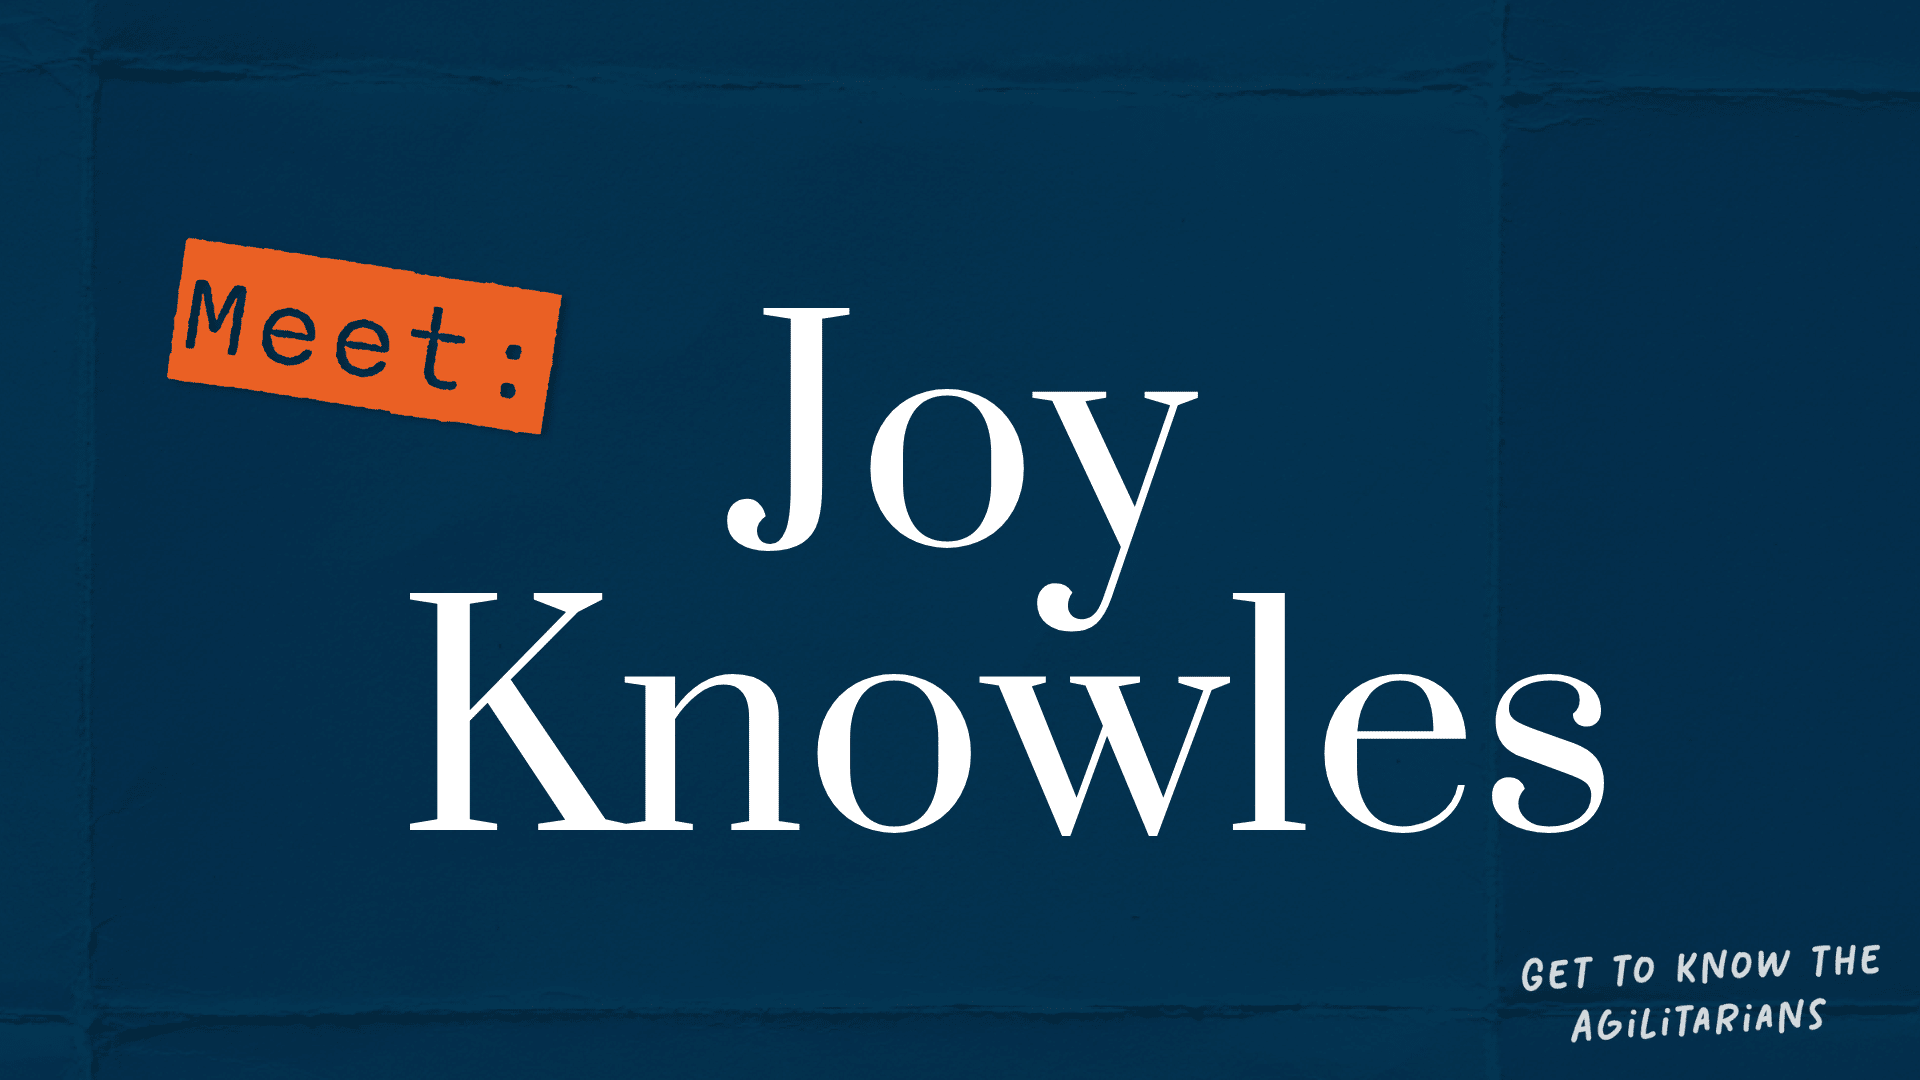 Get to know the Agilitarians: Meet Joy Knowles